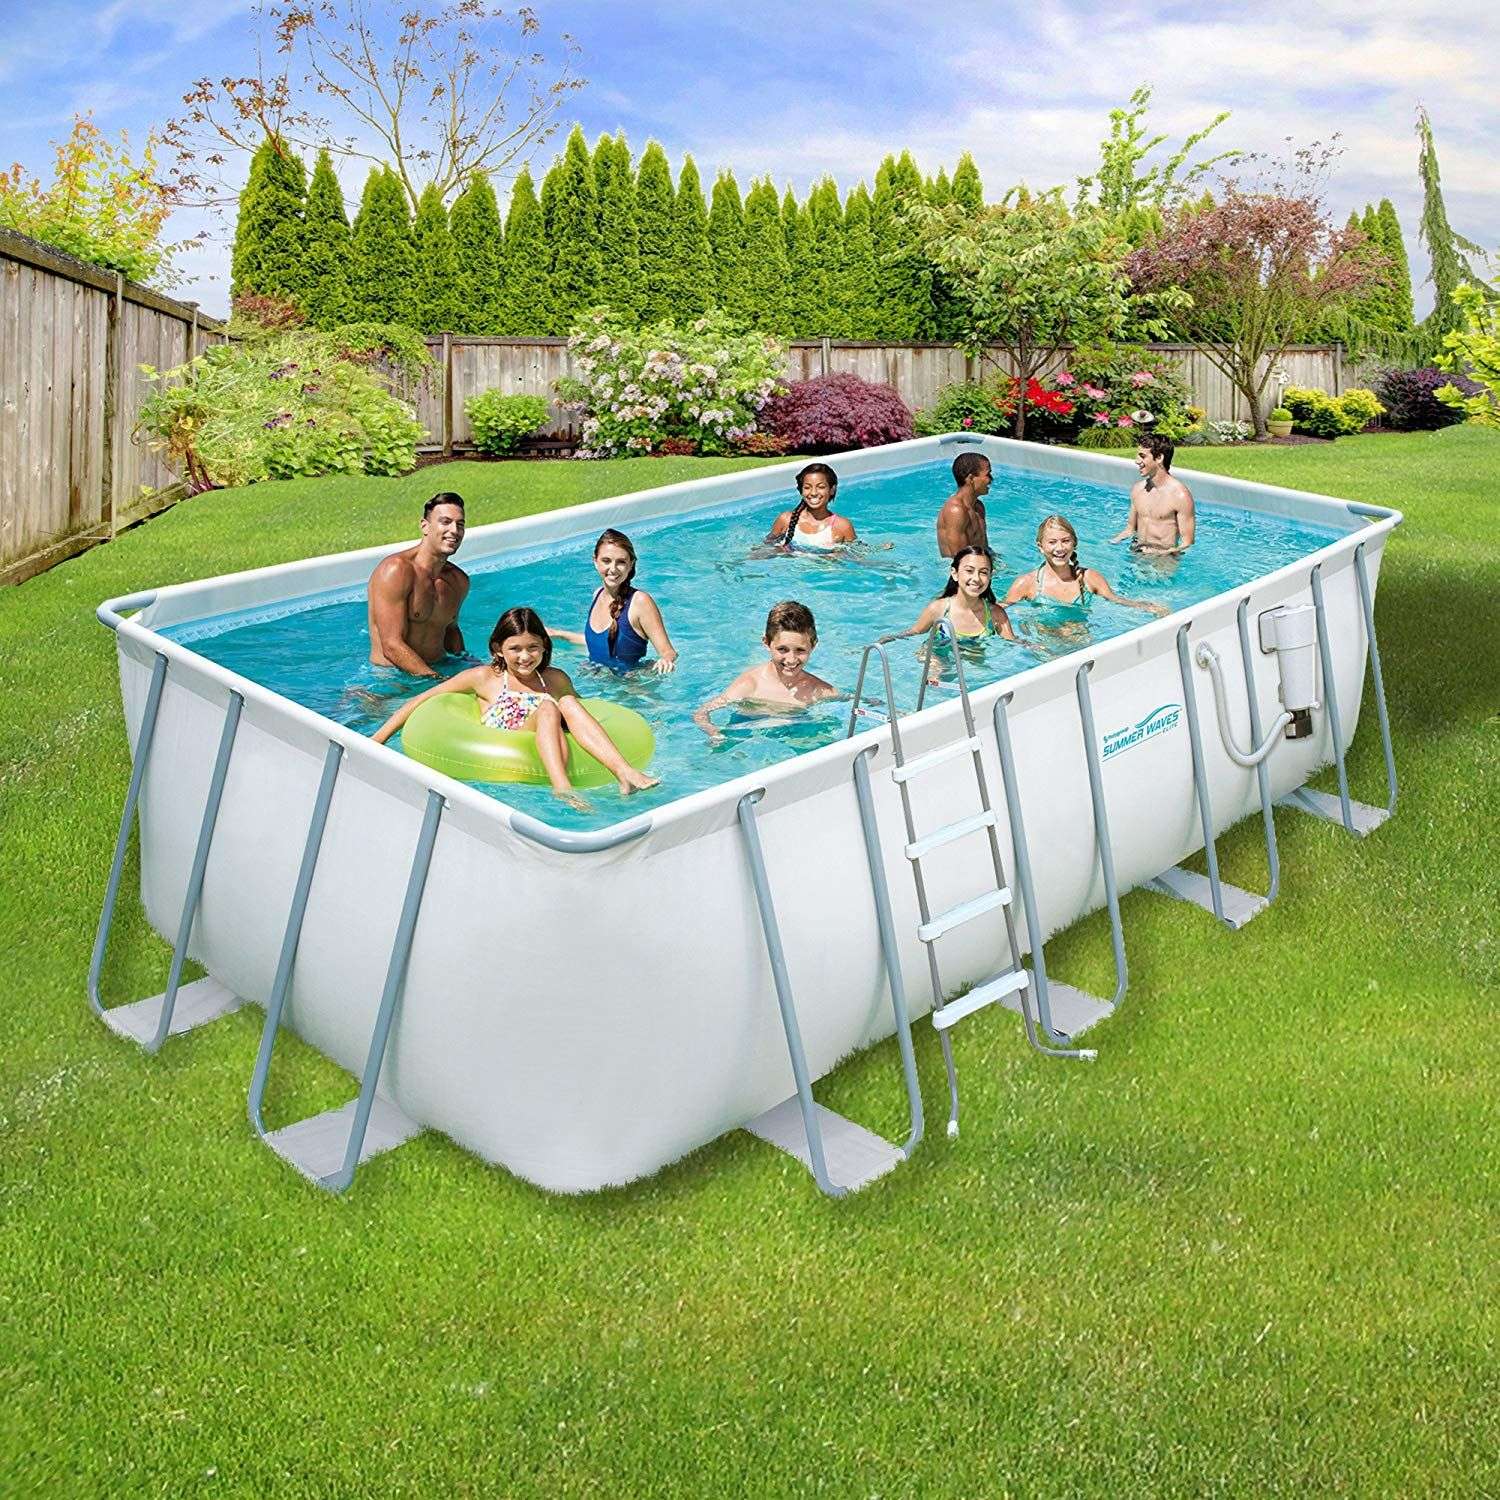 The 9 Best Rectangular Above Ground Pool for 2019: Expert Reviews ...